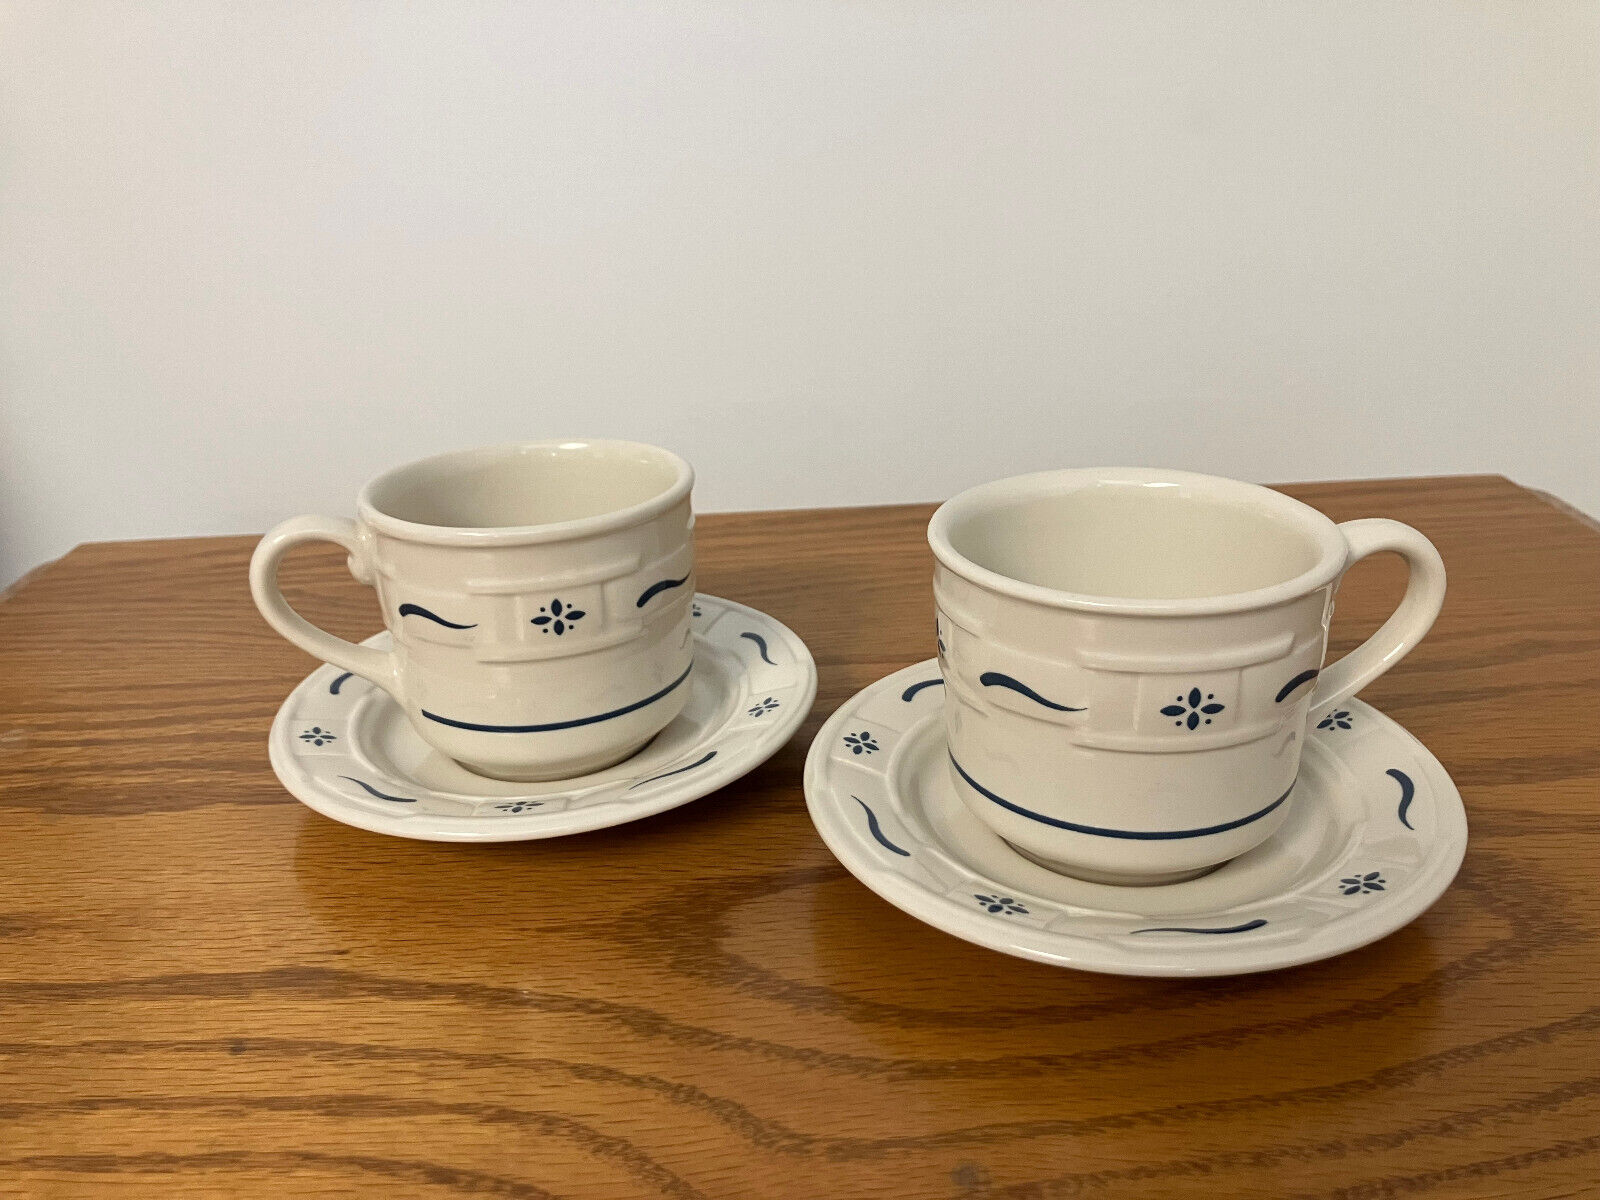 Longaberger Pottery Woven Traditions Blue Coffee/Tea Cups and Saucers ~ Two Sets